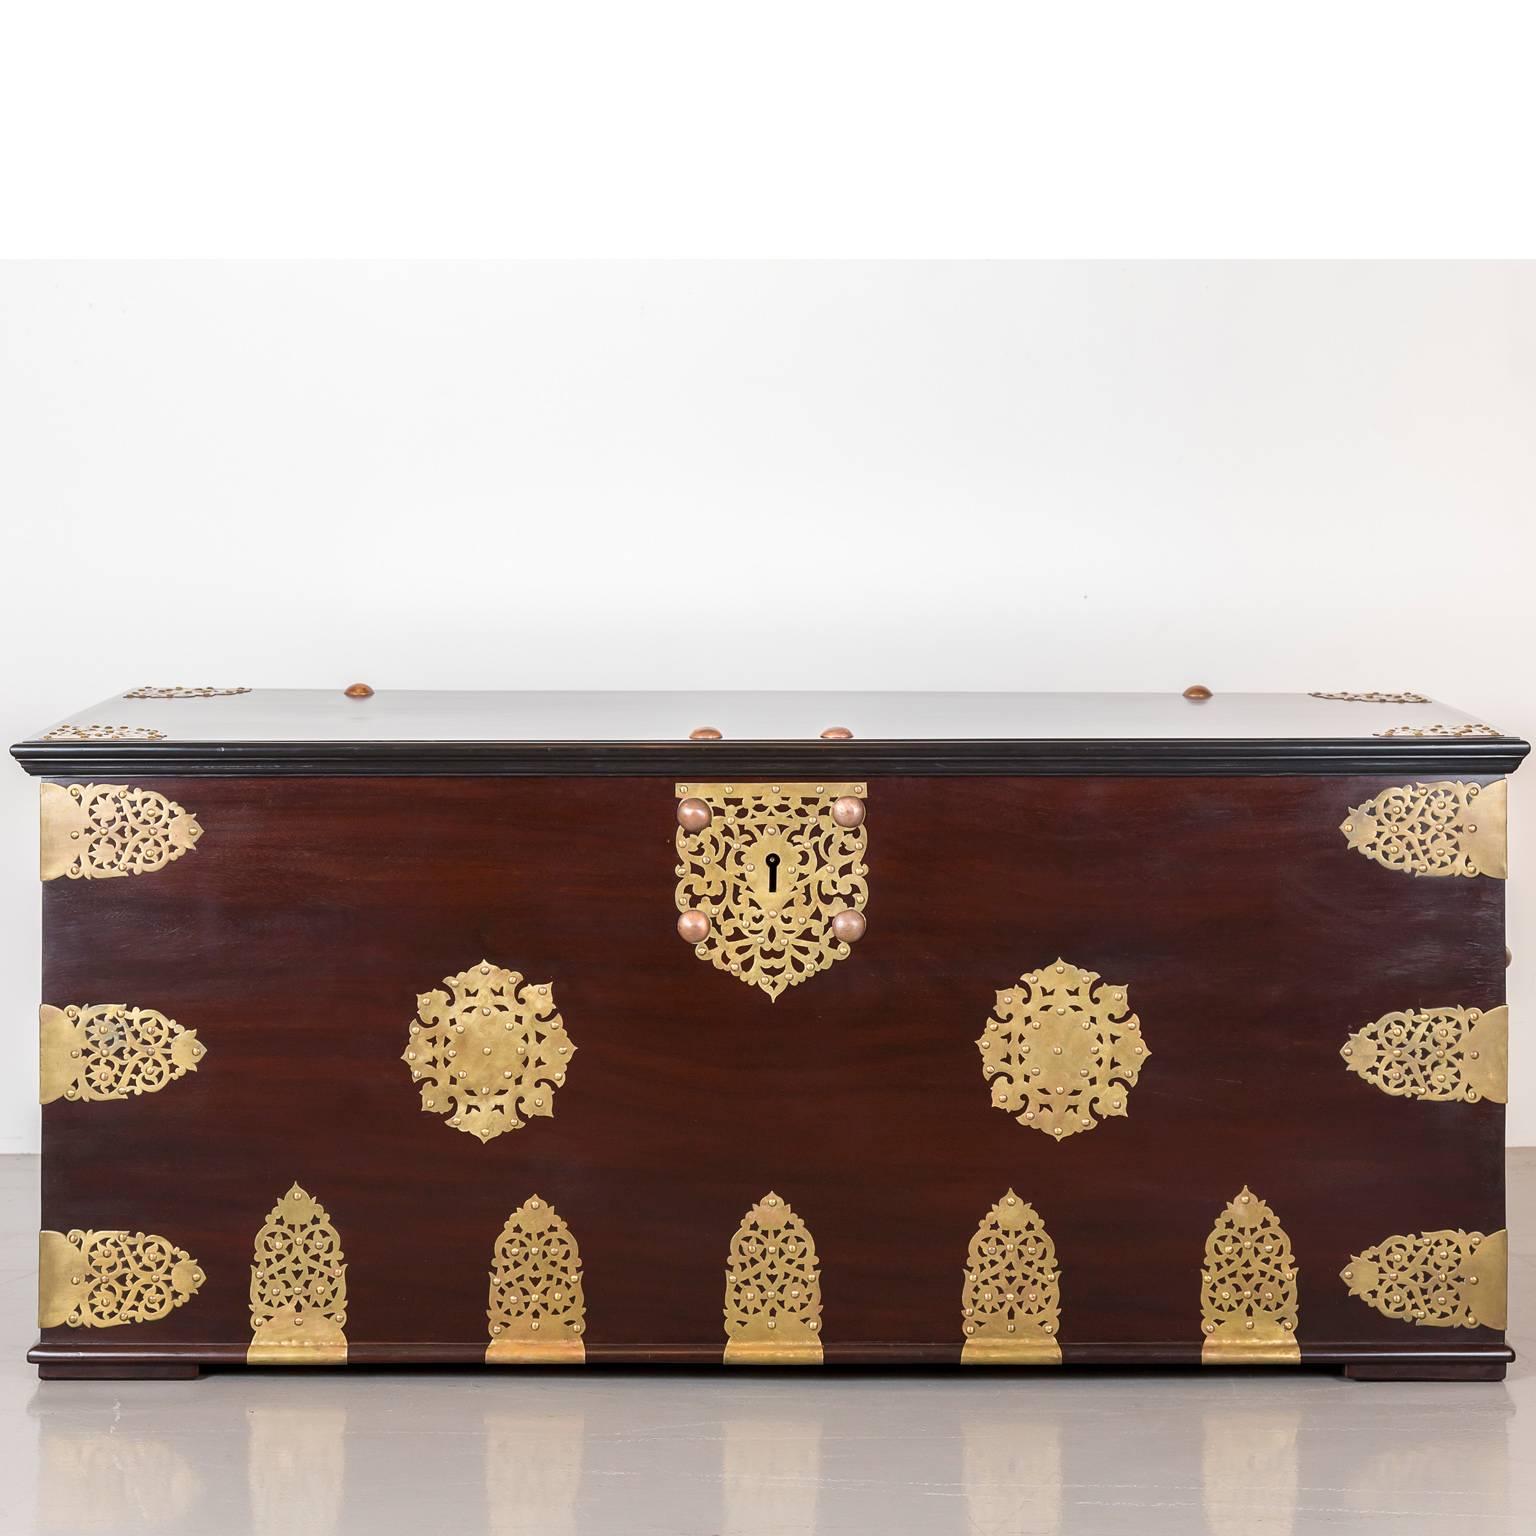 An absolutely stunning and unique Dutch colonial very big storage chest, on all six sides made of single planks of rare Cuban mahogany. It incorporates both Mughal and Dutch influences. The overlapping top with an ebony border. The chest is